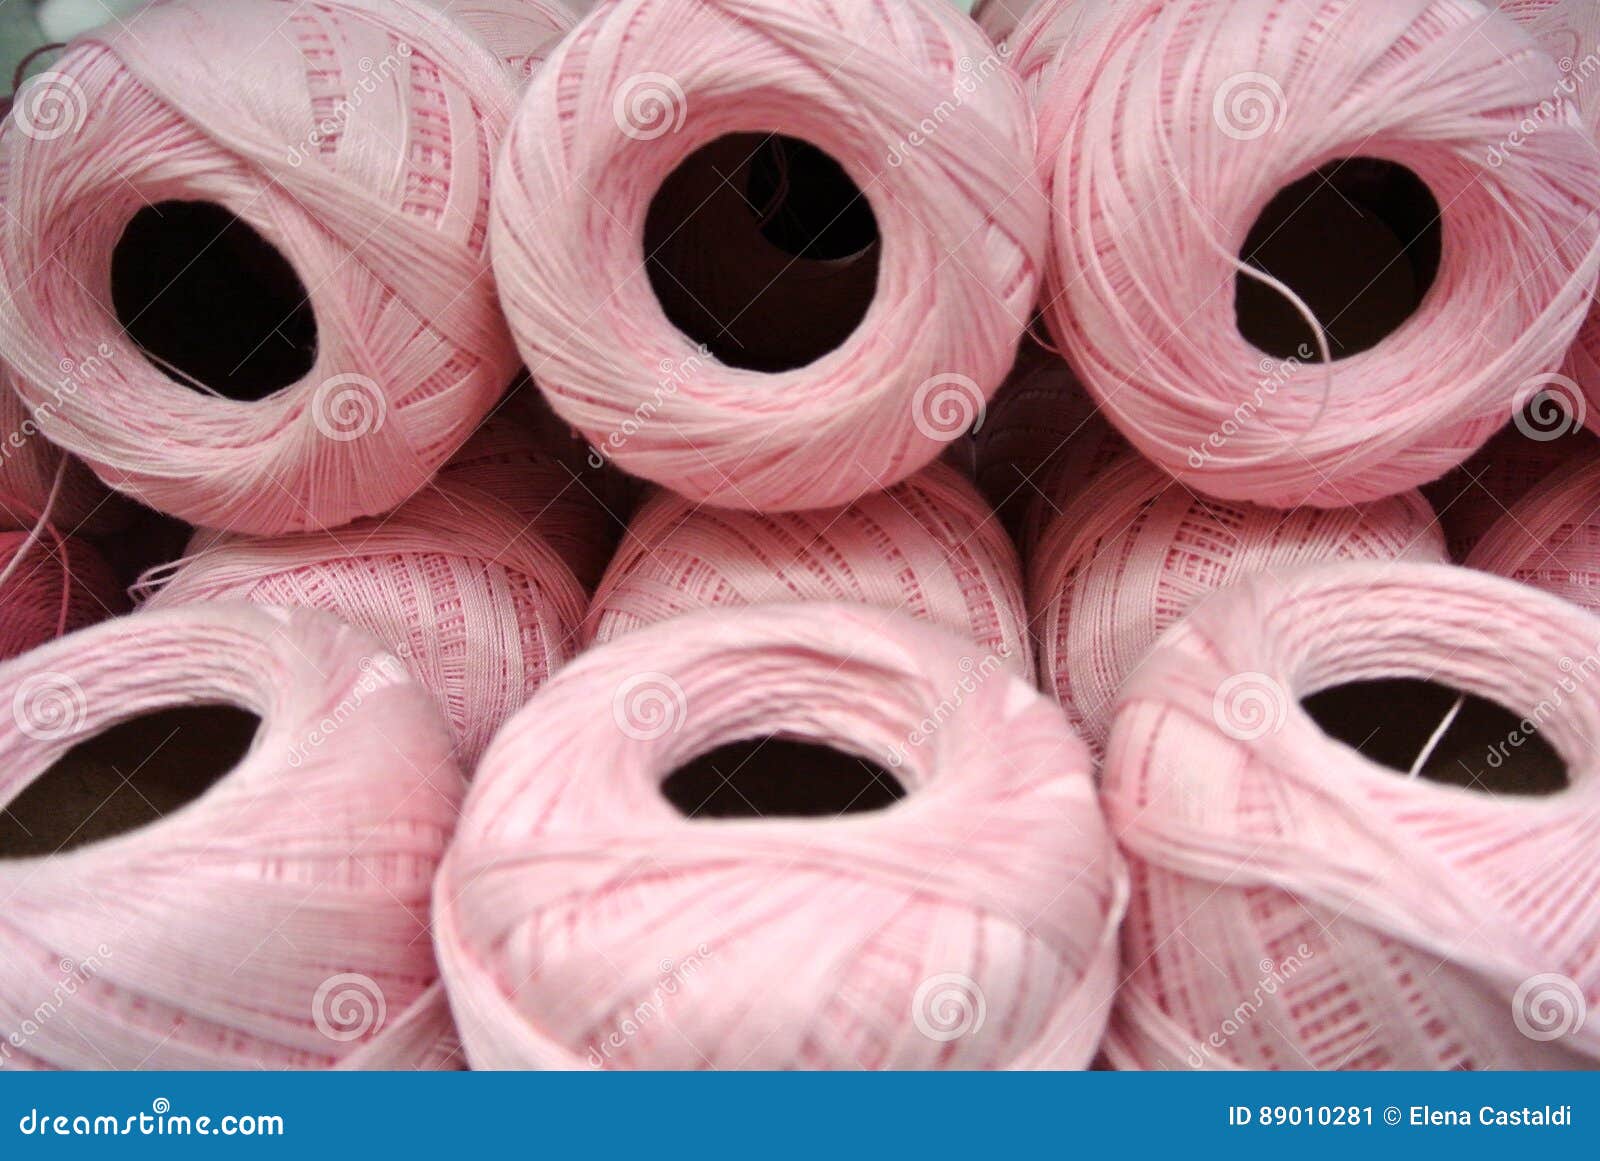 Cotton thread reel stock image. Image of reeln, isolated - 89010281